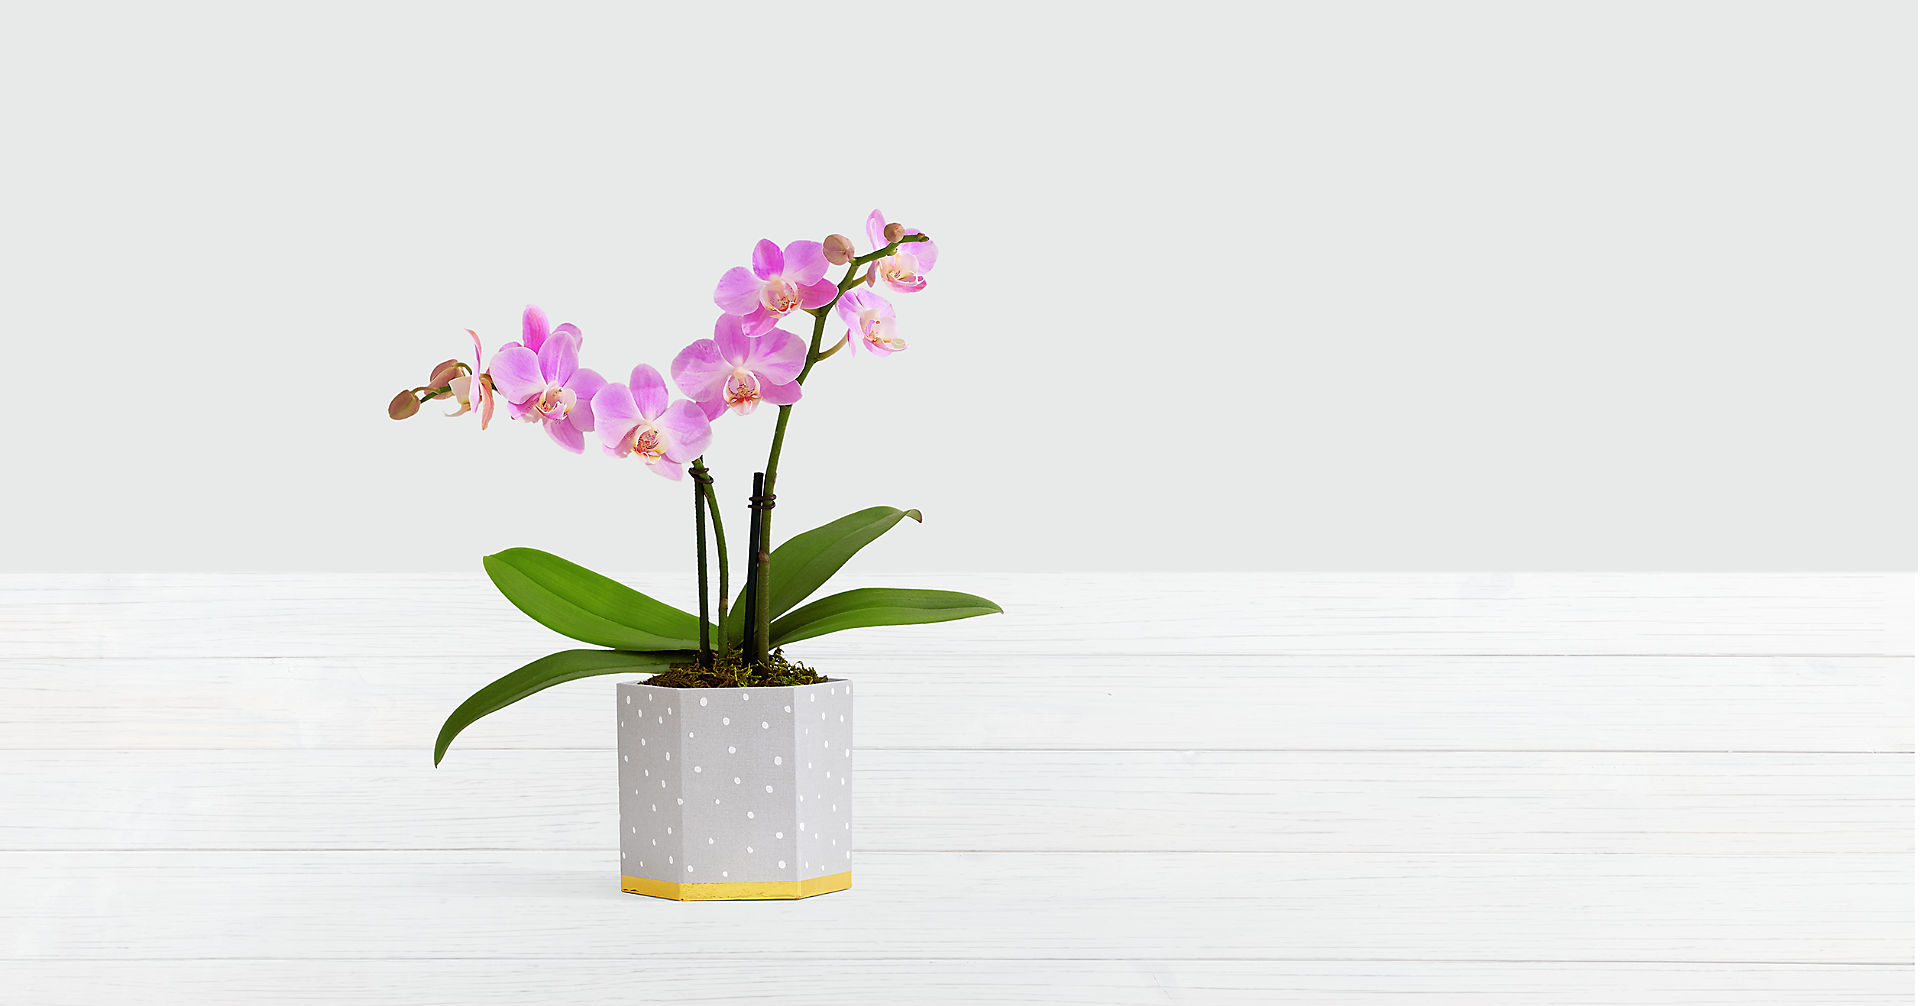 Pink Mini Orchid